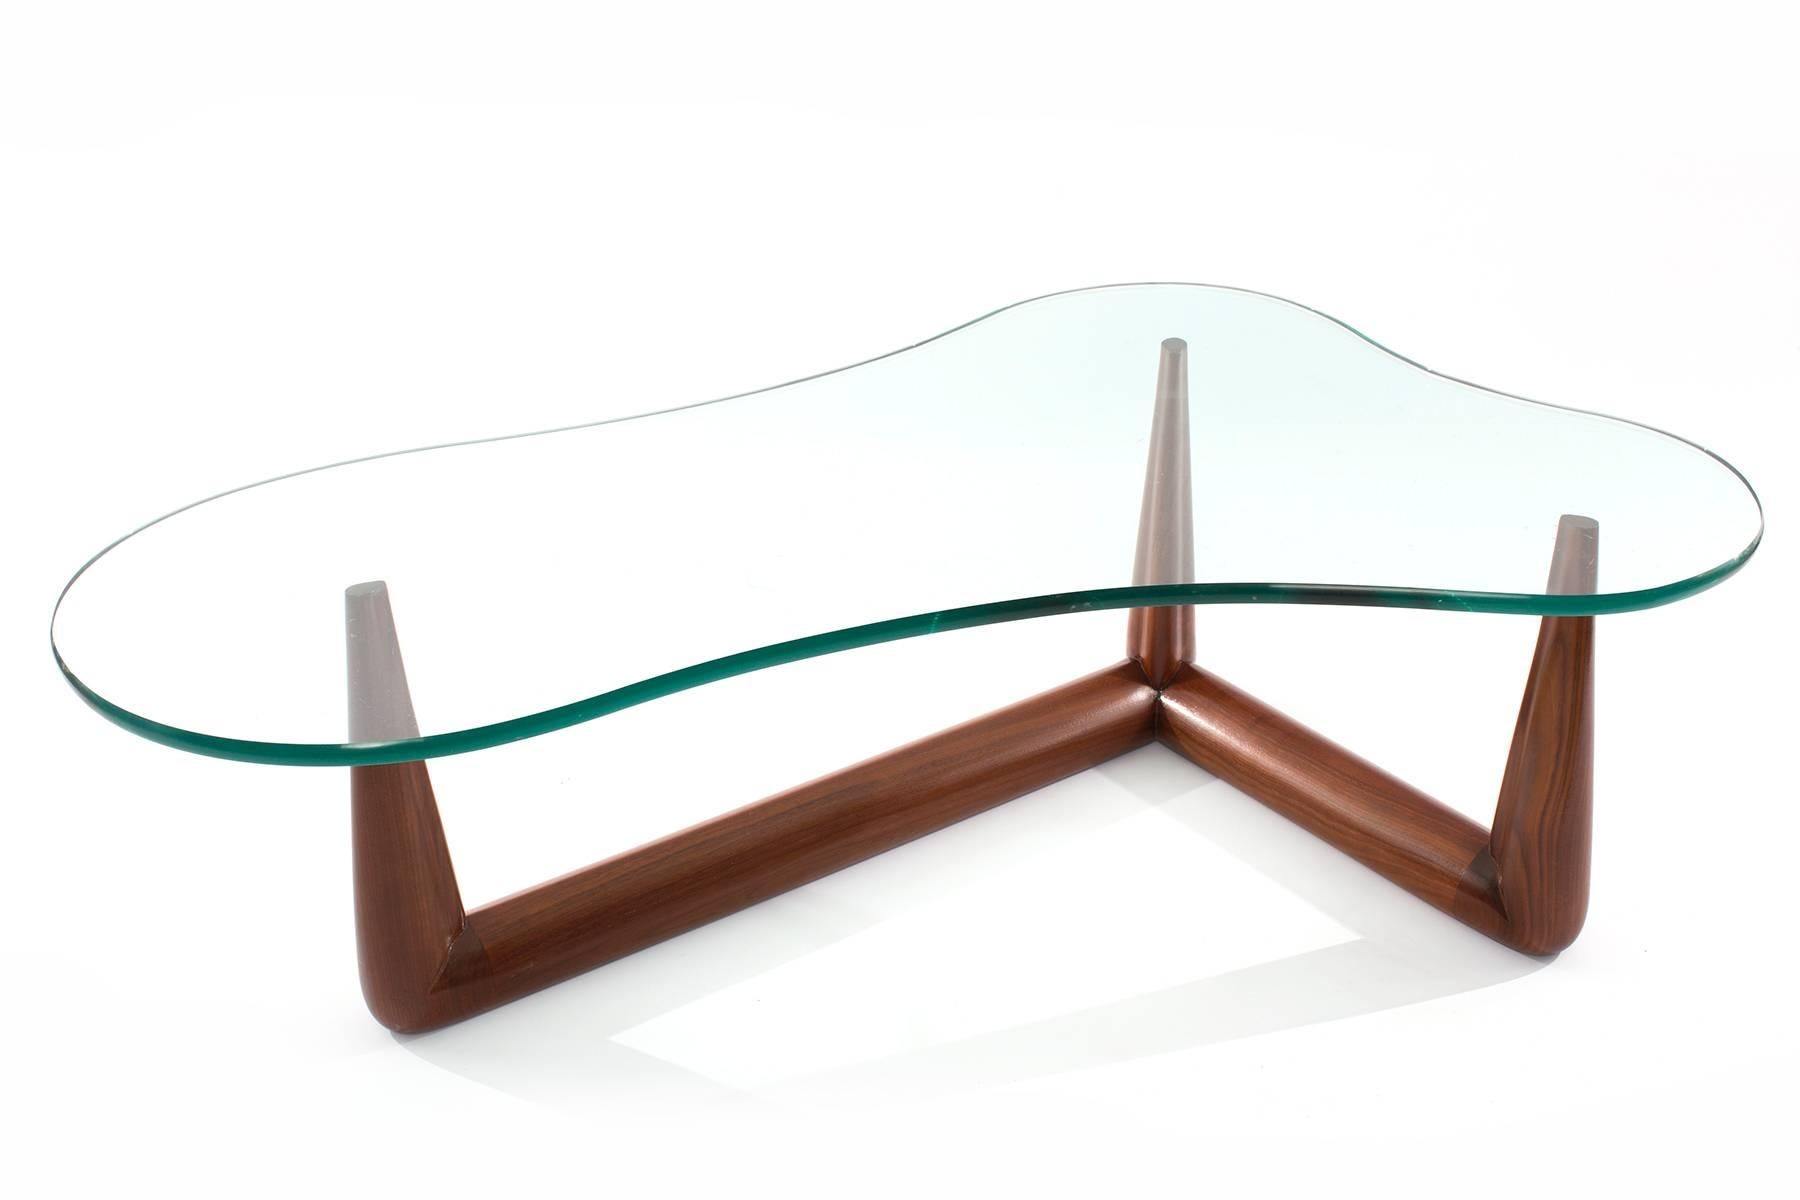 Free form glass and solid walnut cocktail table by T.H. Robsjohn Gibbings for Widdicomb circa early 1950s. 
This elegant example has a tapered solid walnut base that has been impeccably finished. The glass top is 0.75” thick.